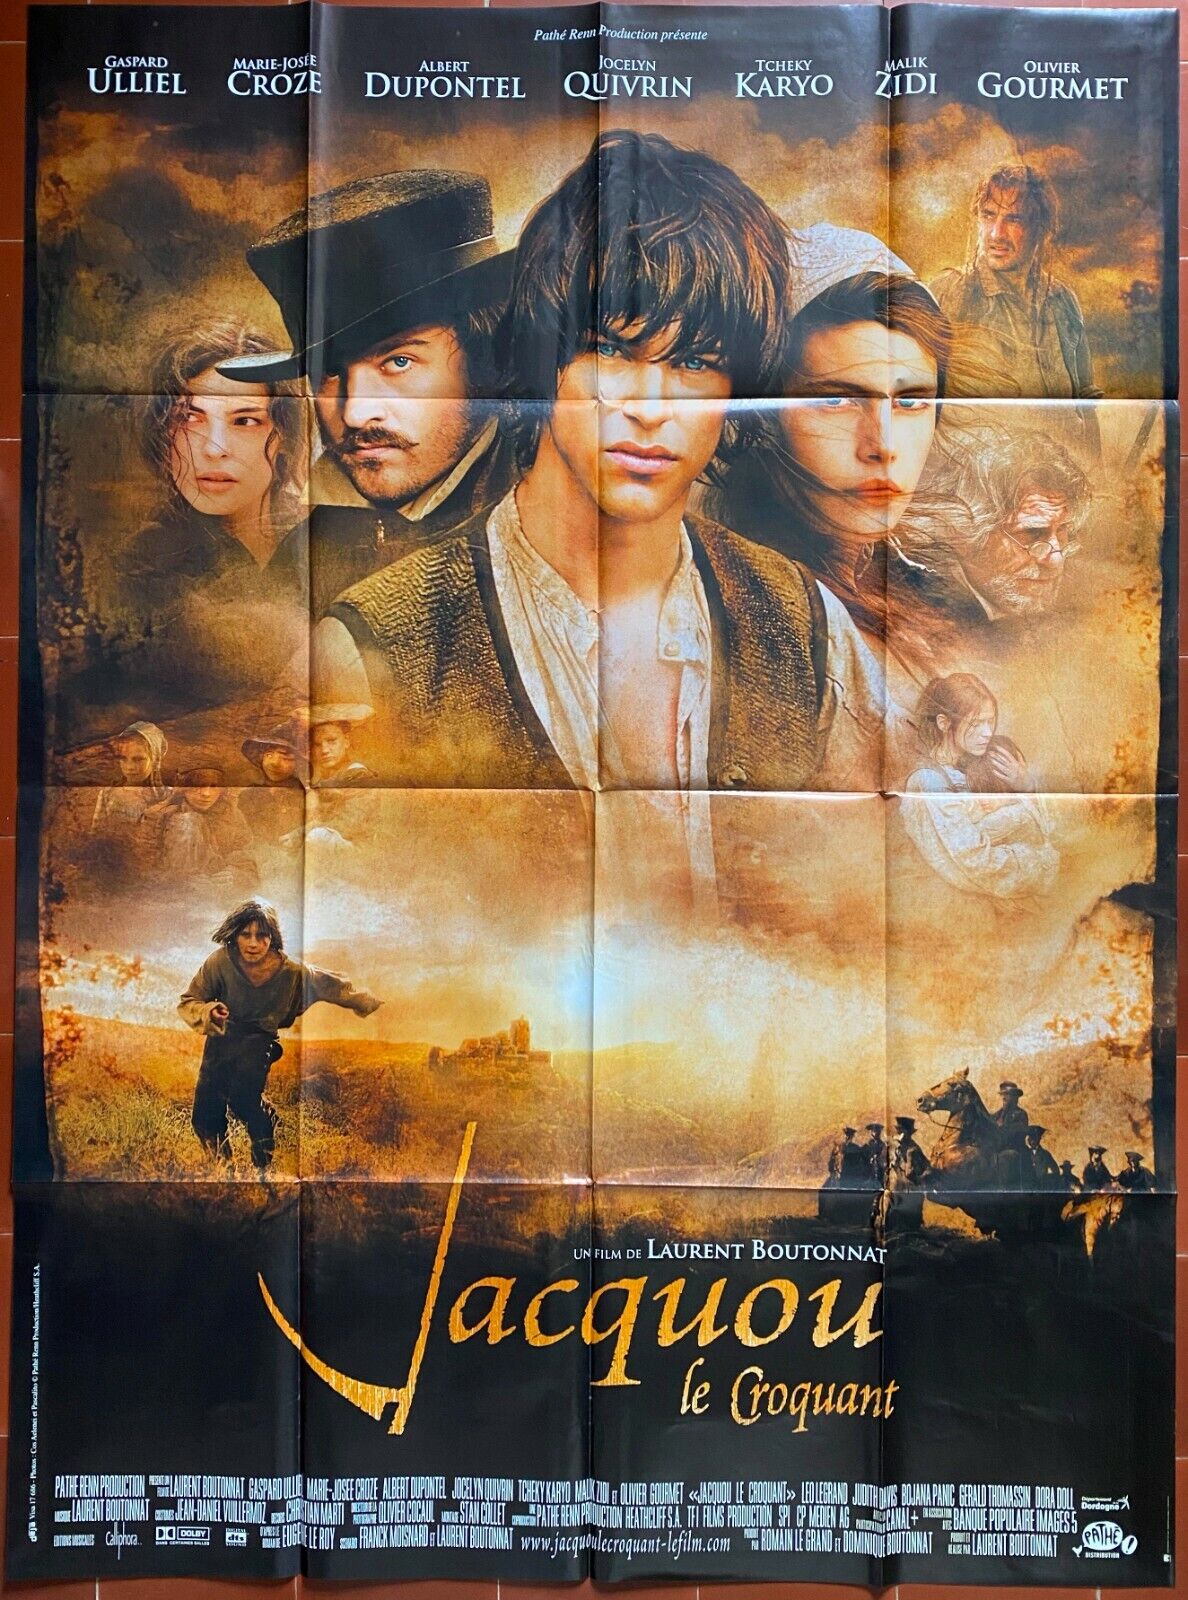 Poster Jacquou The Crunchy Albert Dupontel Gaspard Ulliel 31 1/2x43 5/16in